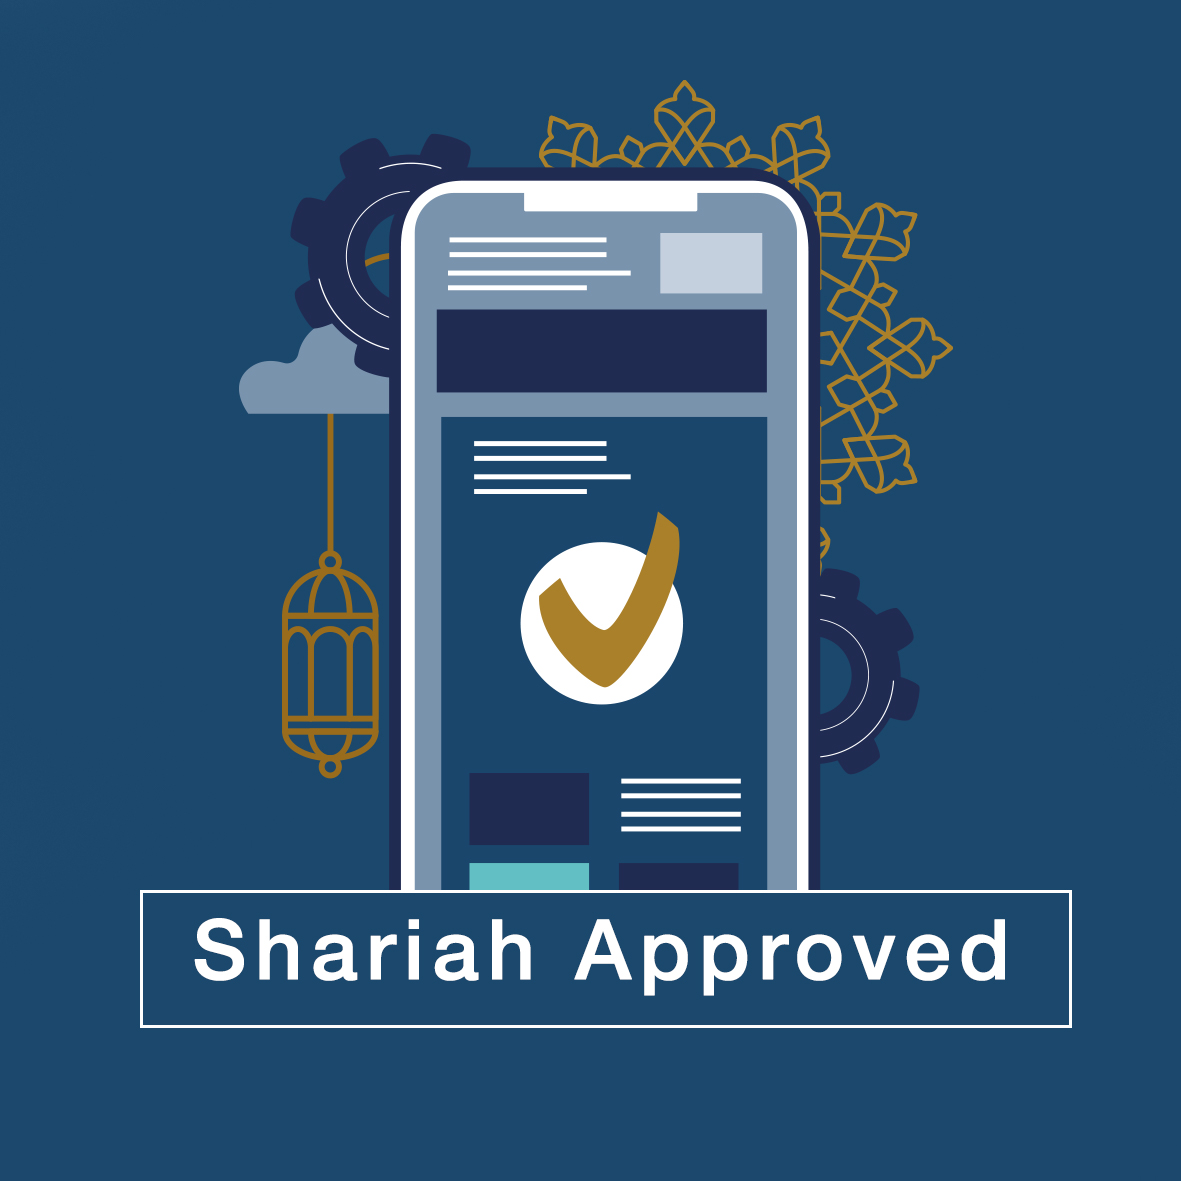 Ae manage shariah approved